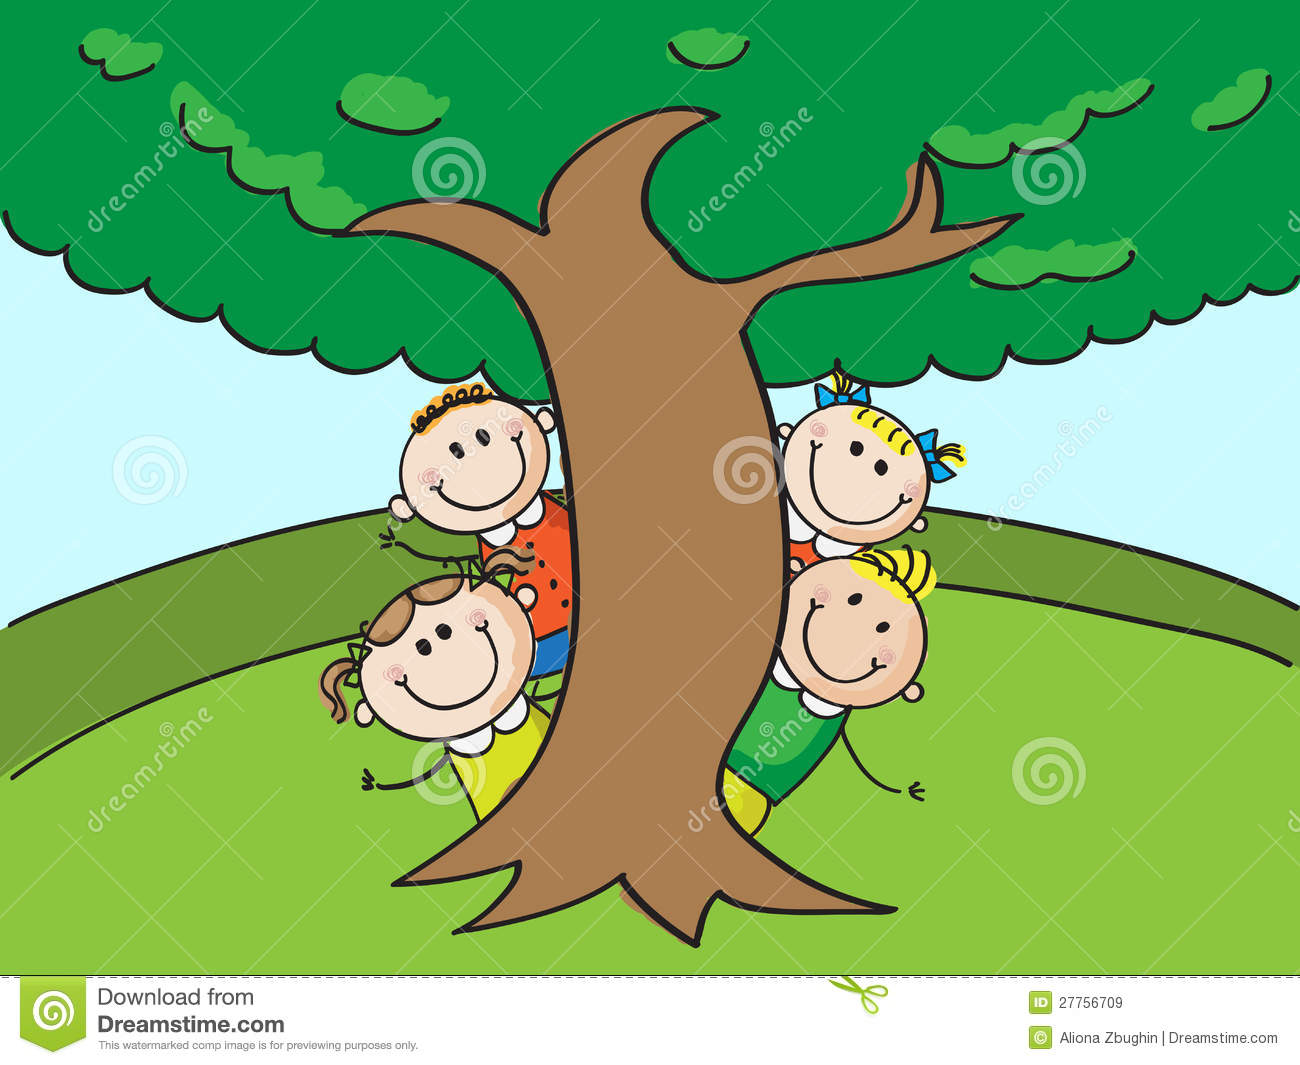 Kids And Tree Royalty Free Stock Images   Image  27756709